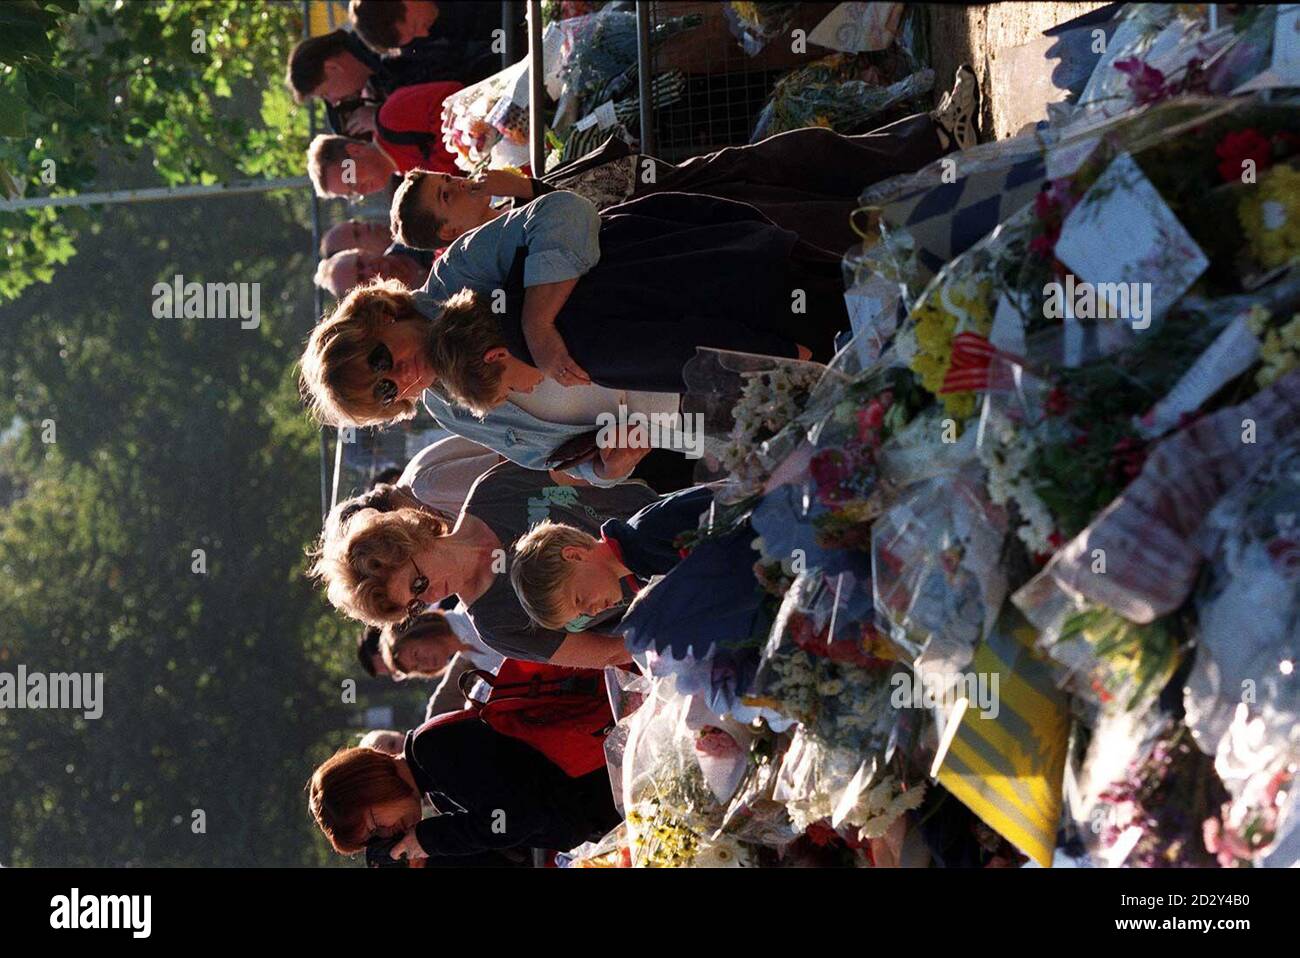 The scene at Kensington Palace this morning (Monday) with crowds still leaving floral tributes to Diana, Princess of Wales. Photo by David Giles. Stock Photo